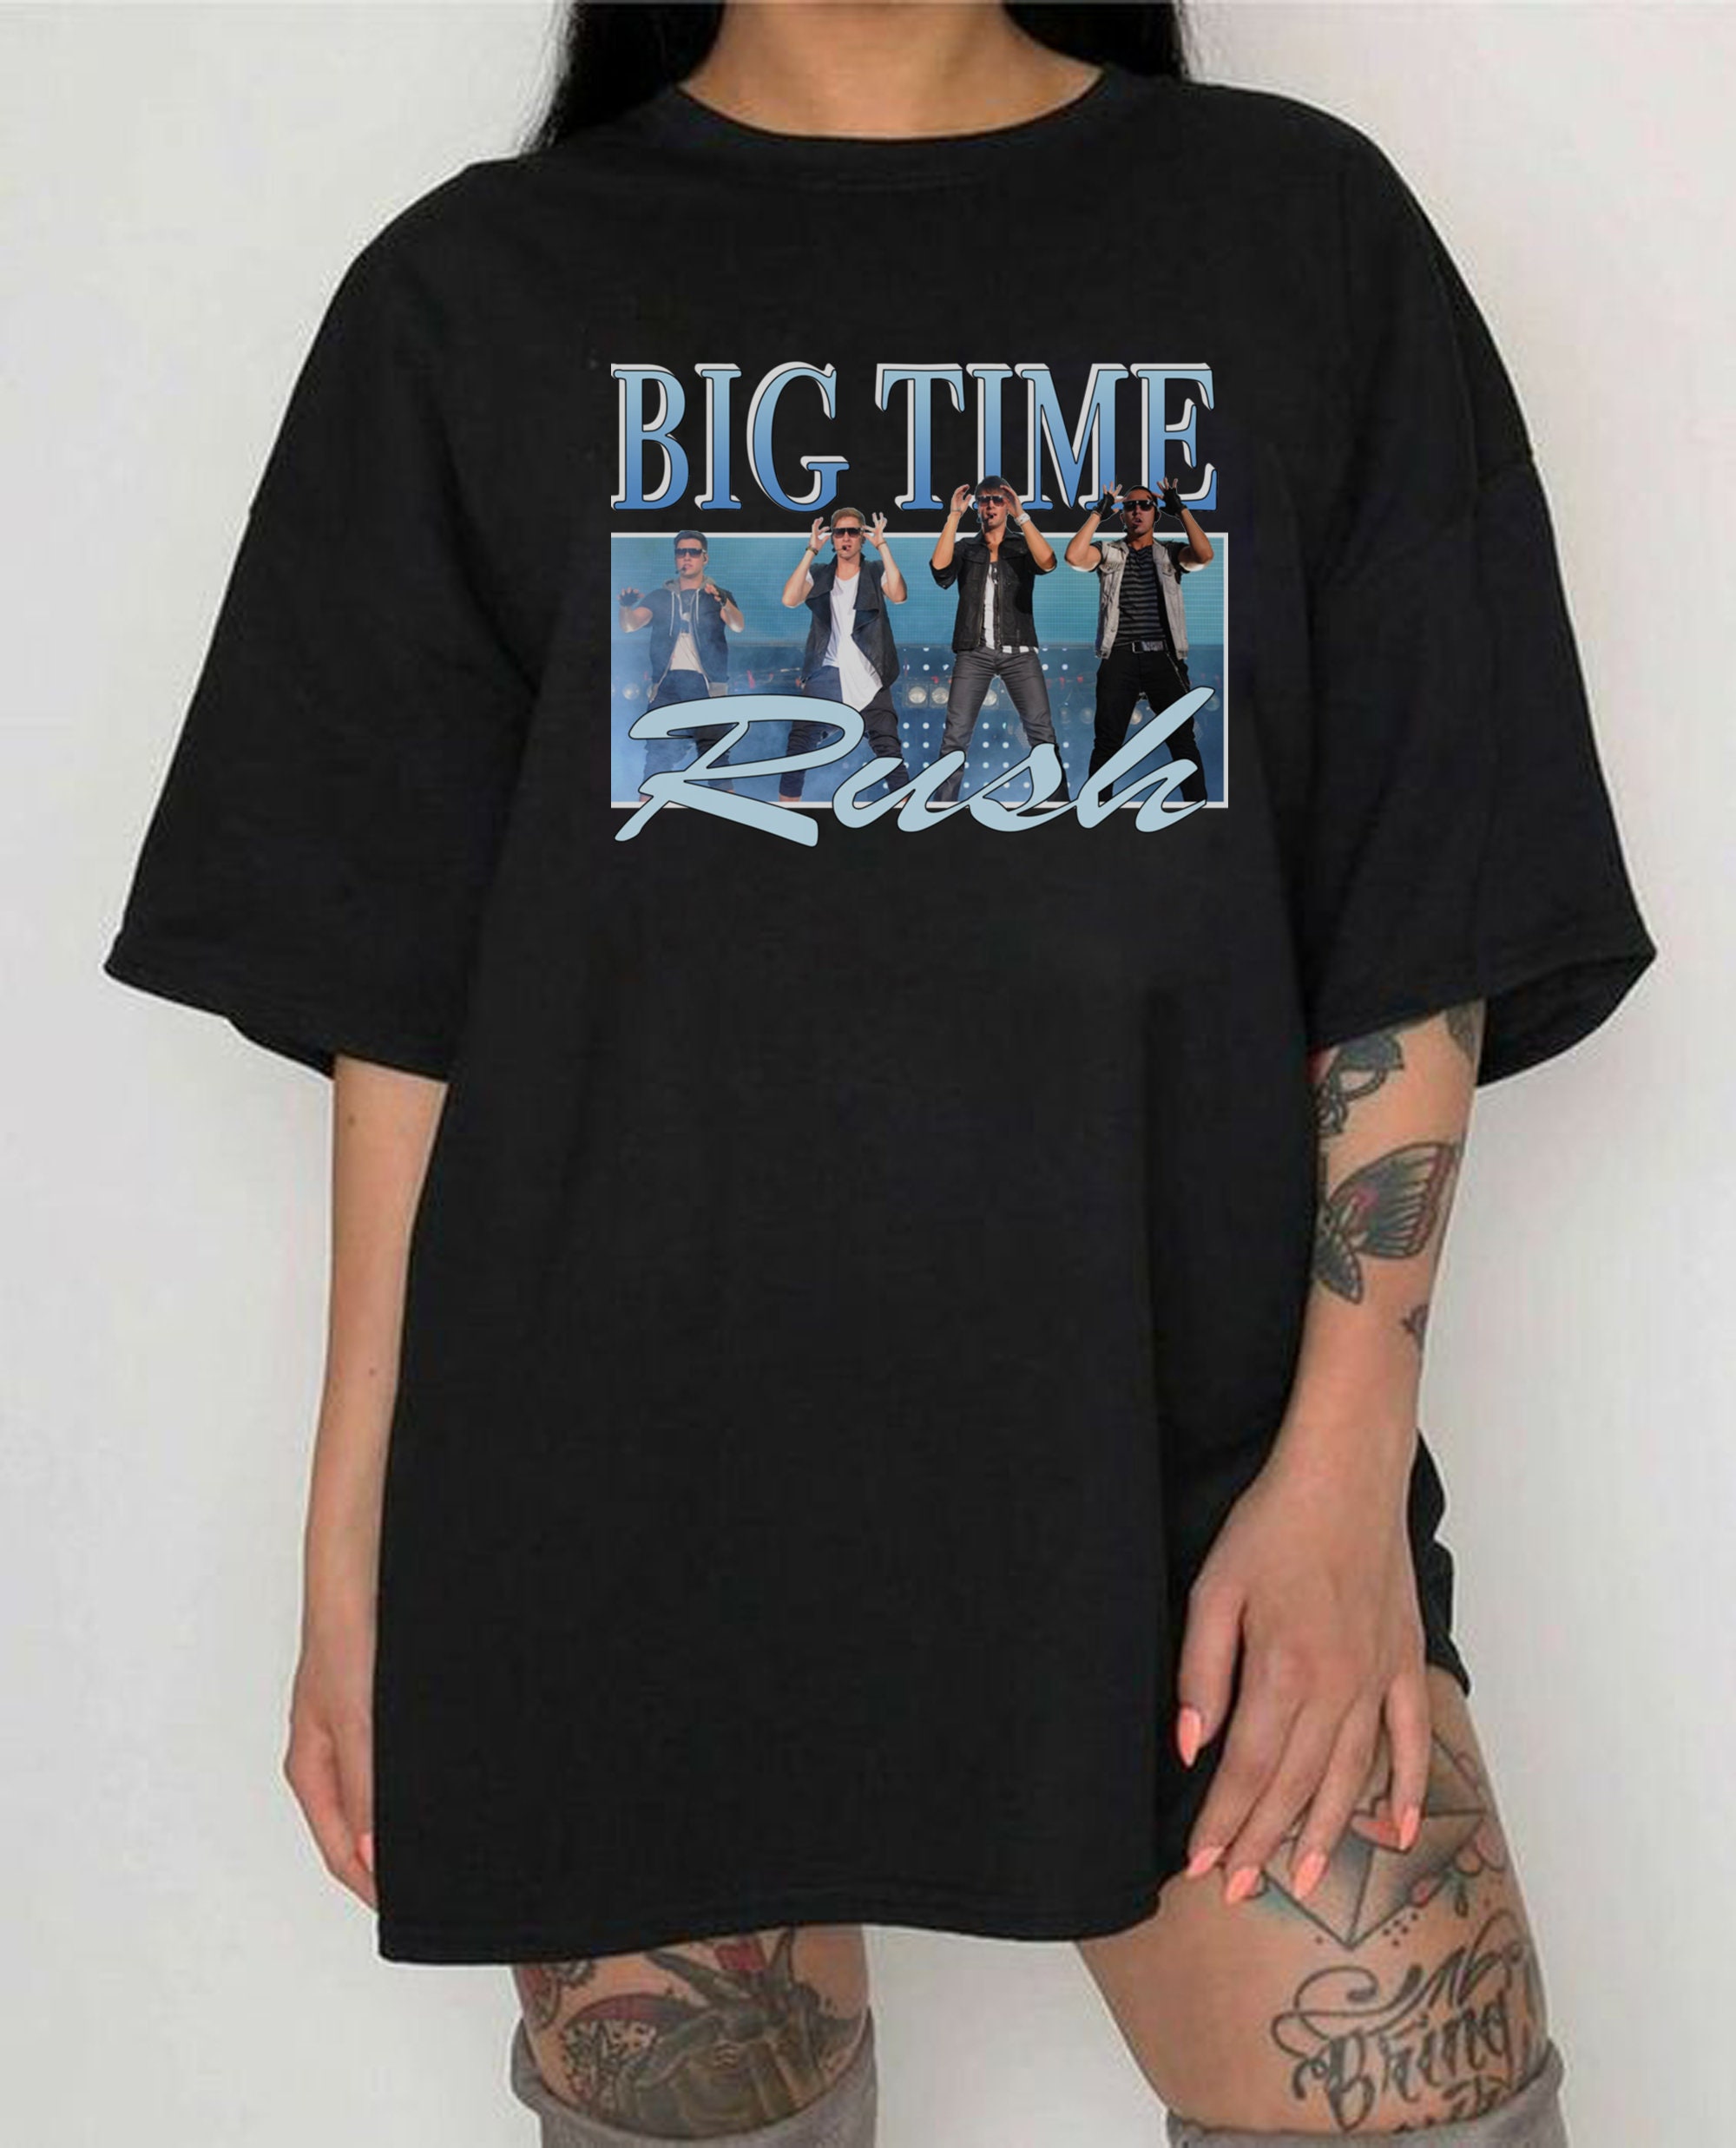 Discover Vintage Big Time Rush Retro T Shirt Logo And Members Tee Rush Band BRT For Men And Women